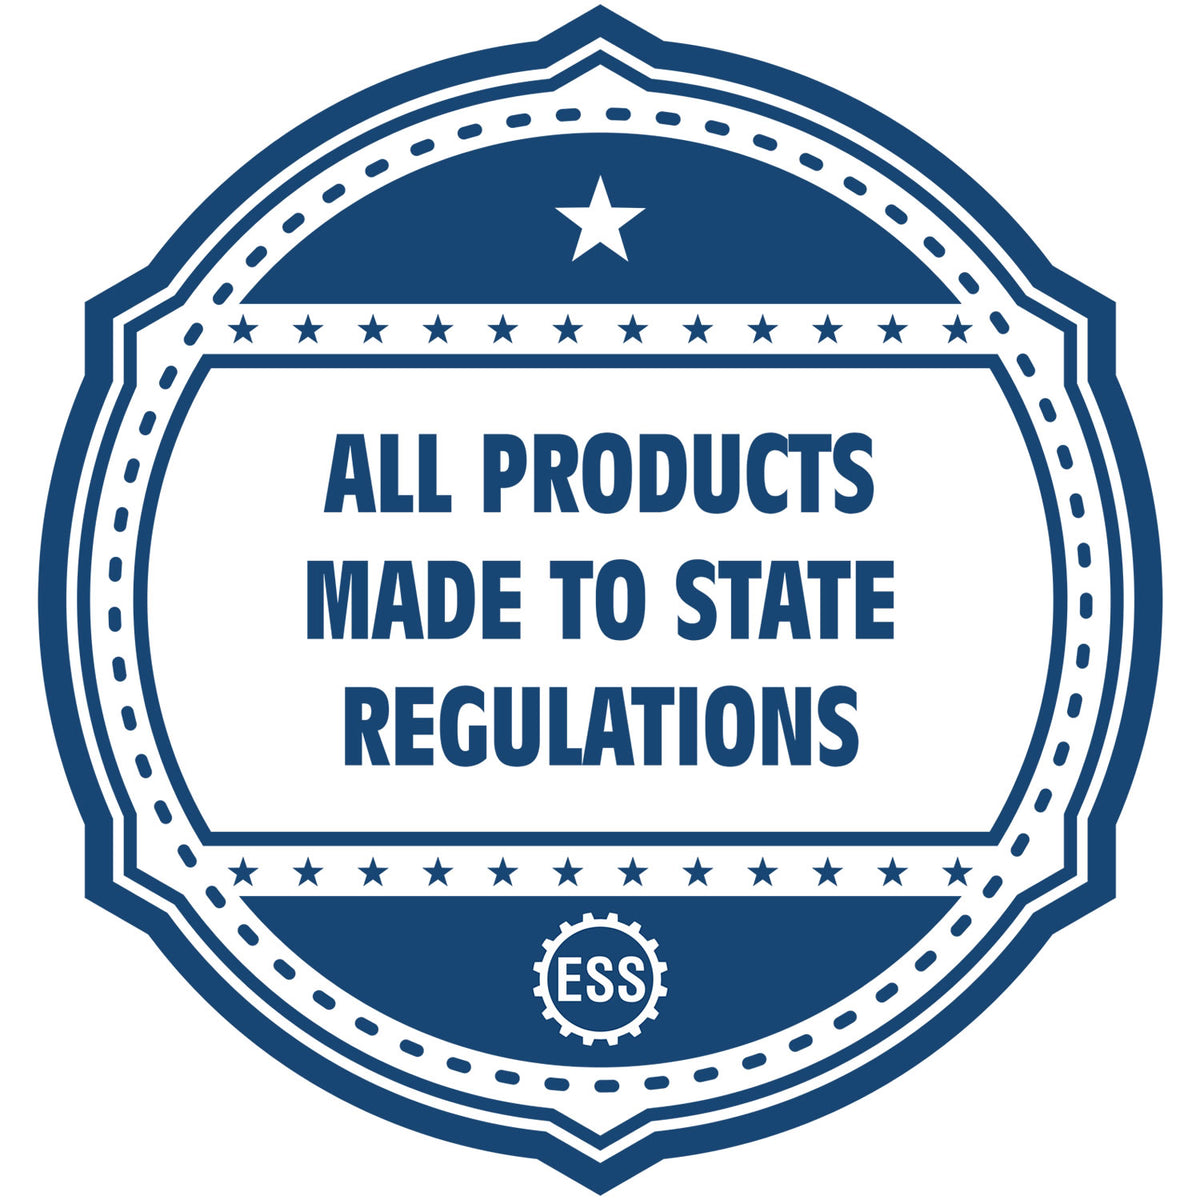 An icon or badge element for the Heavy-Duty Kentucky Rectangular Notary Stamp showing that this product is made in compliance with state regulations.